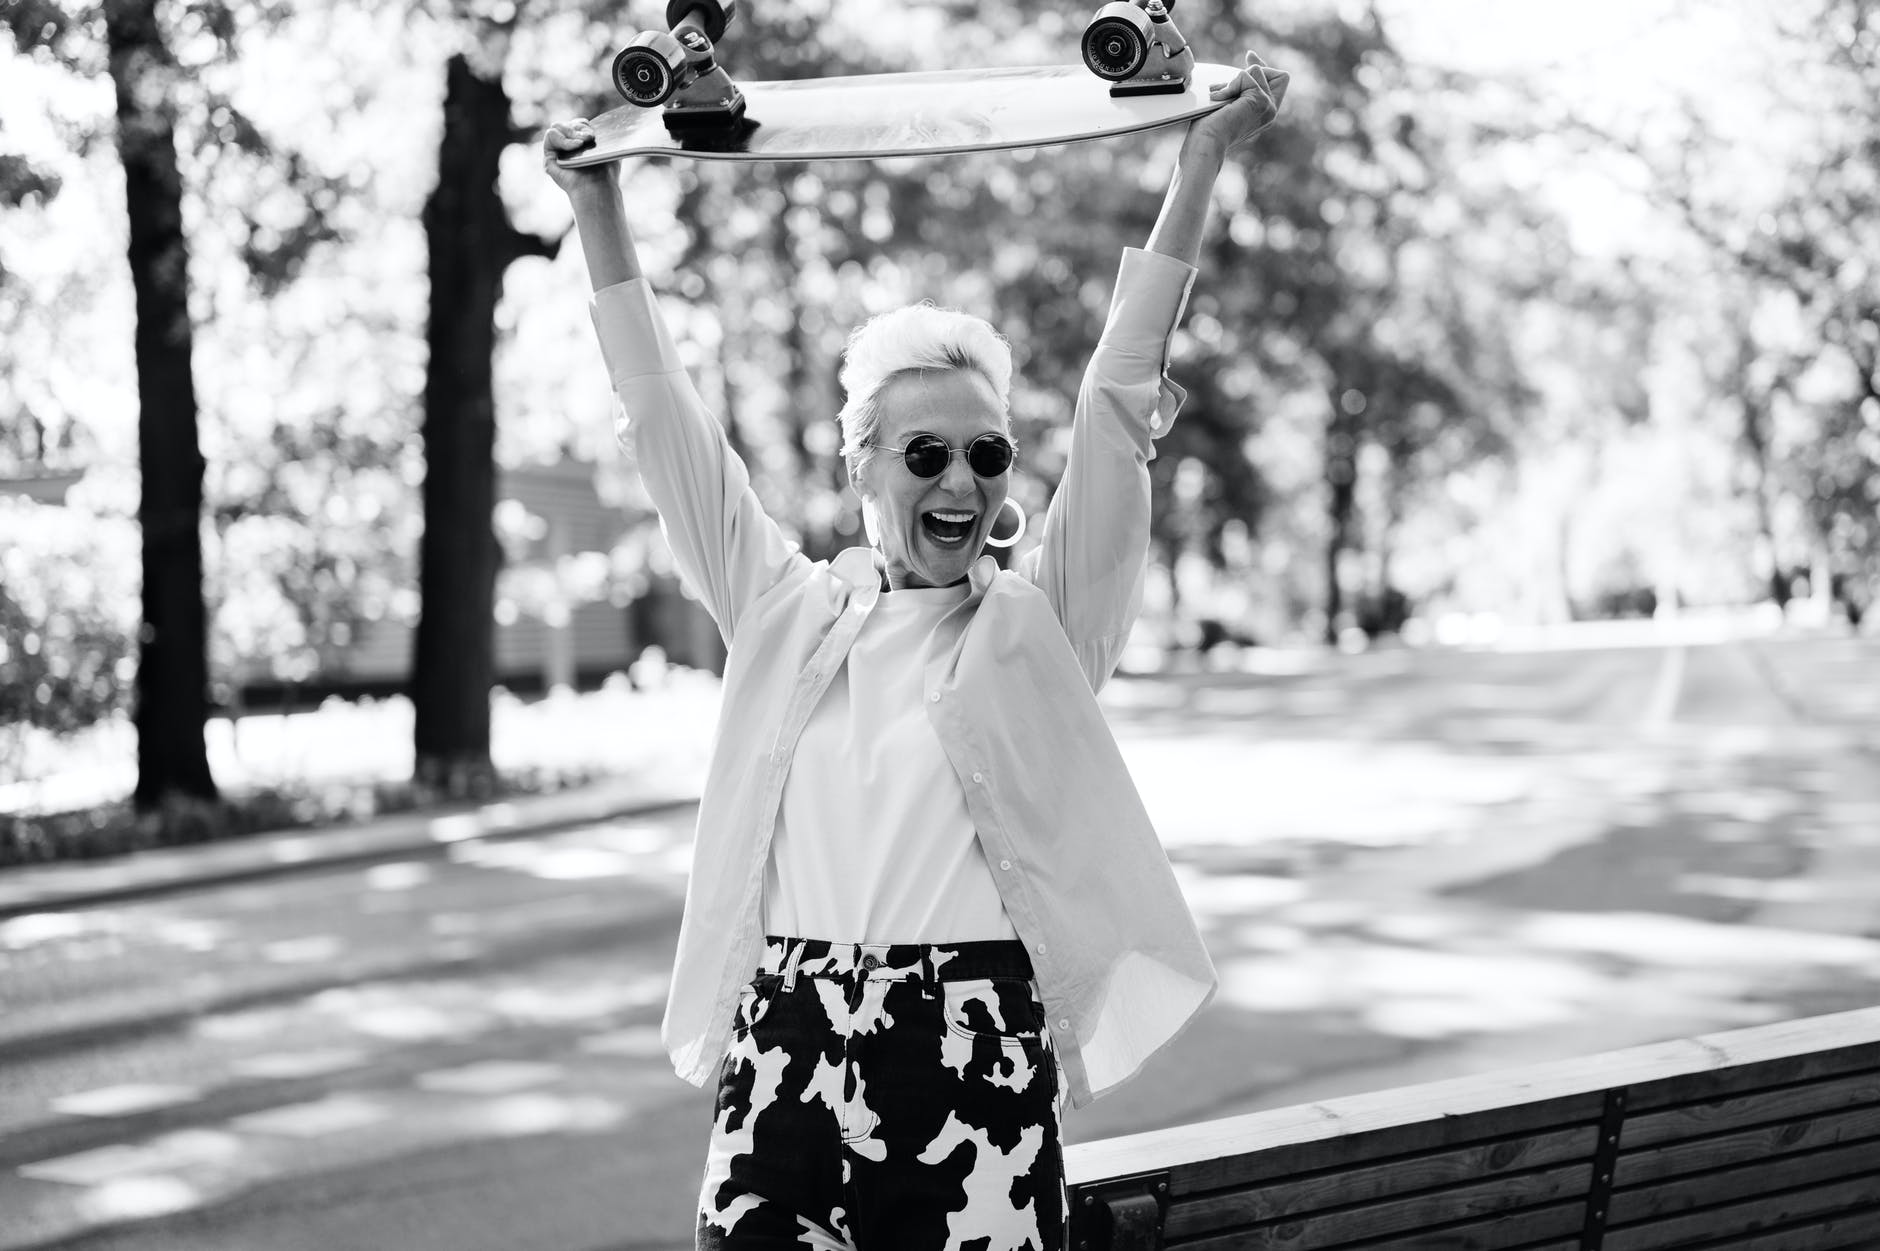 grayscale photo of a woman holding a skateboard above her head